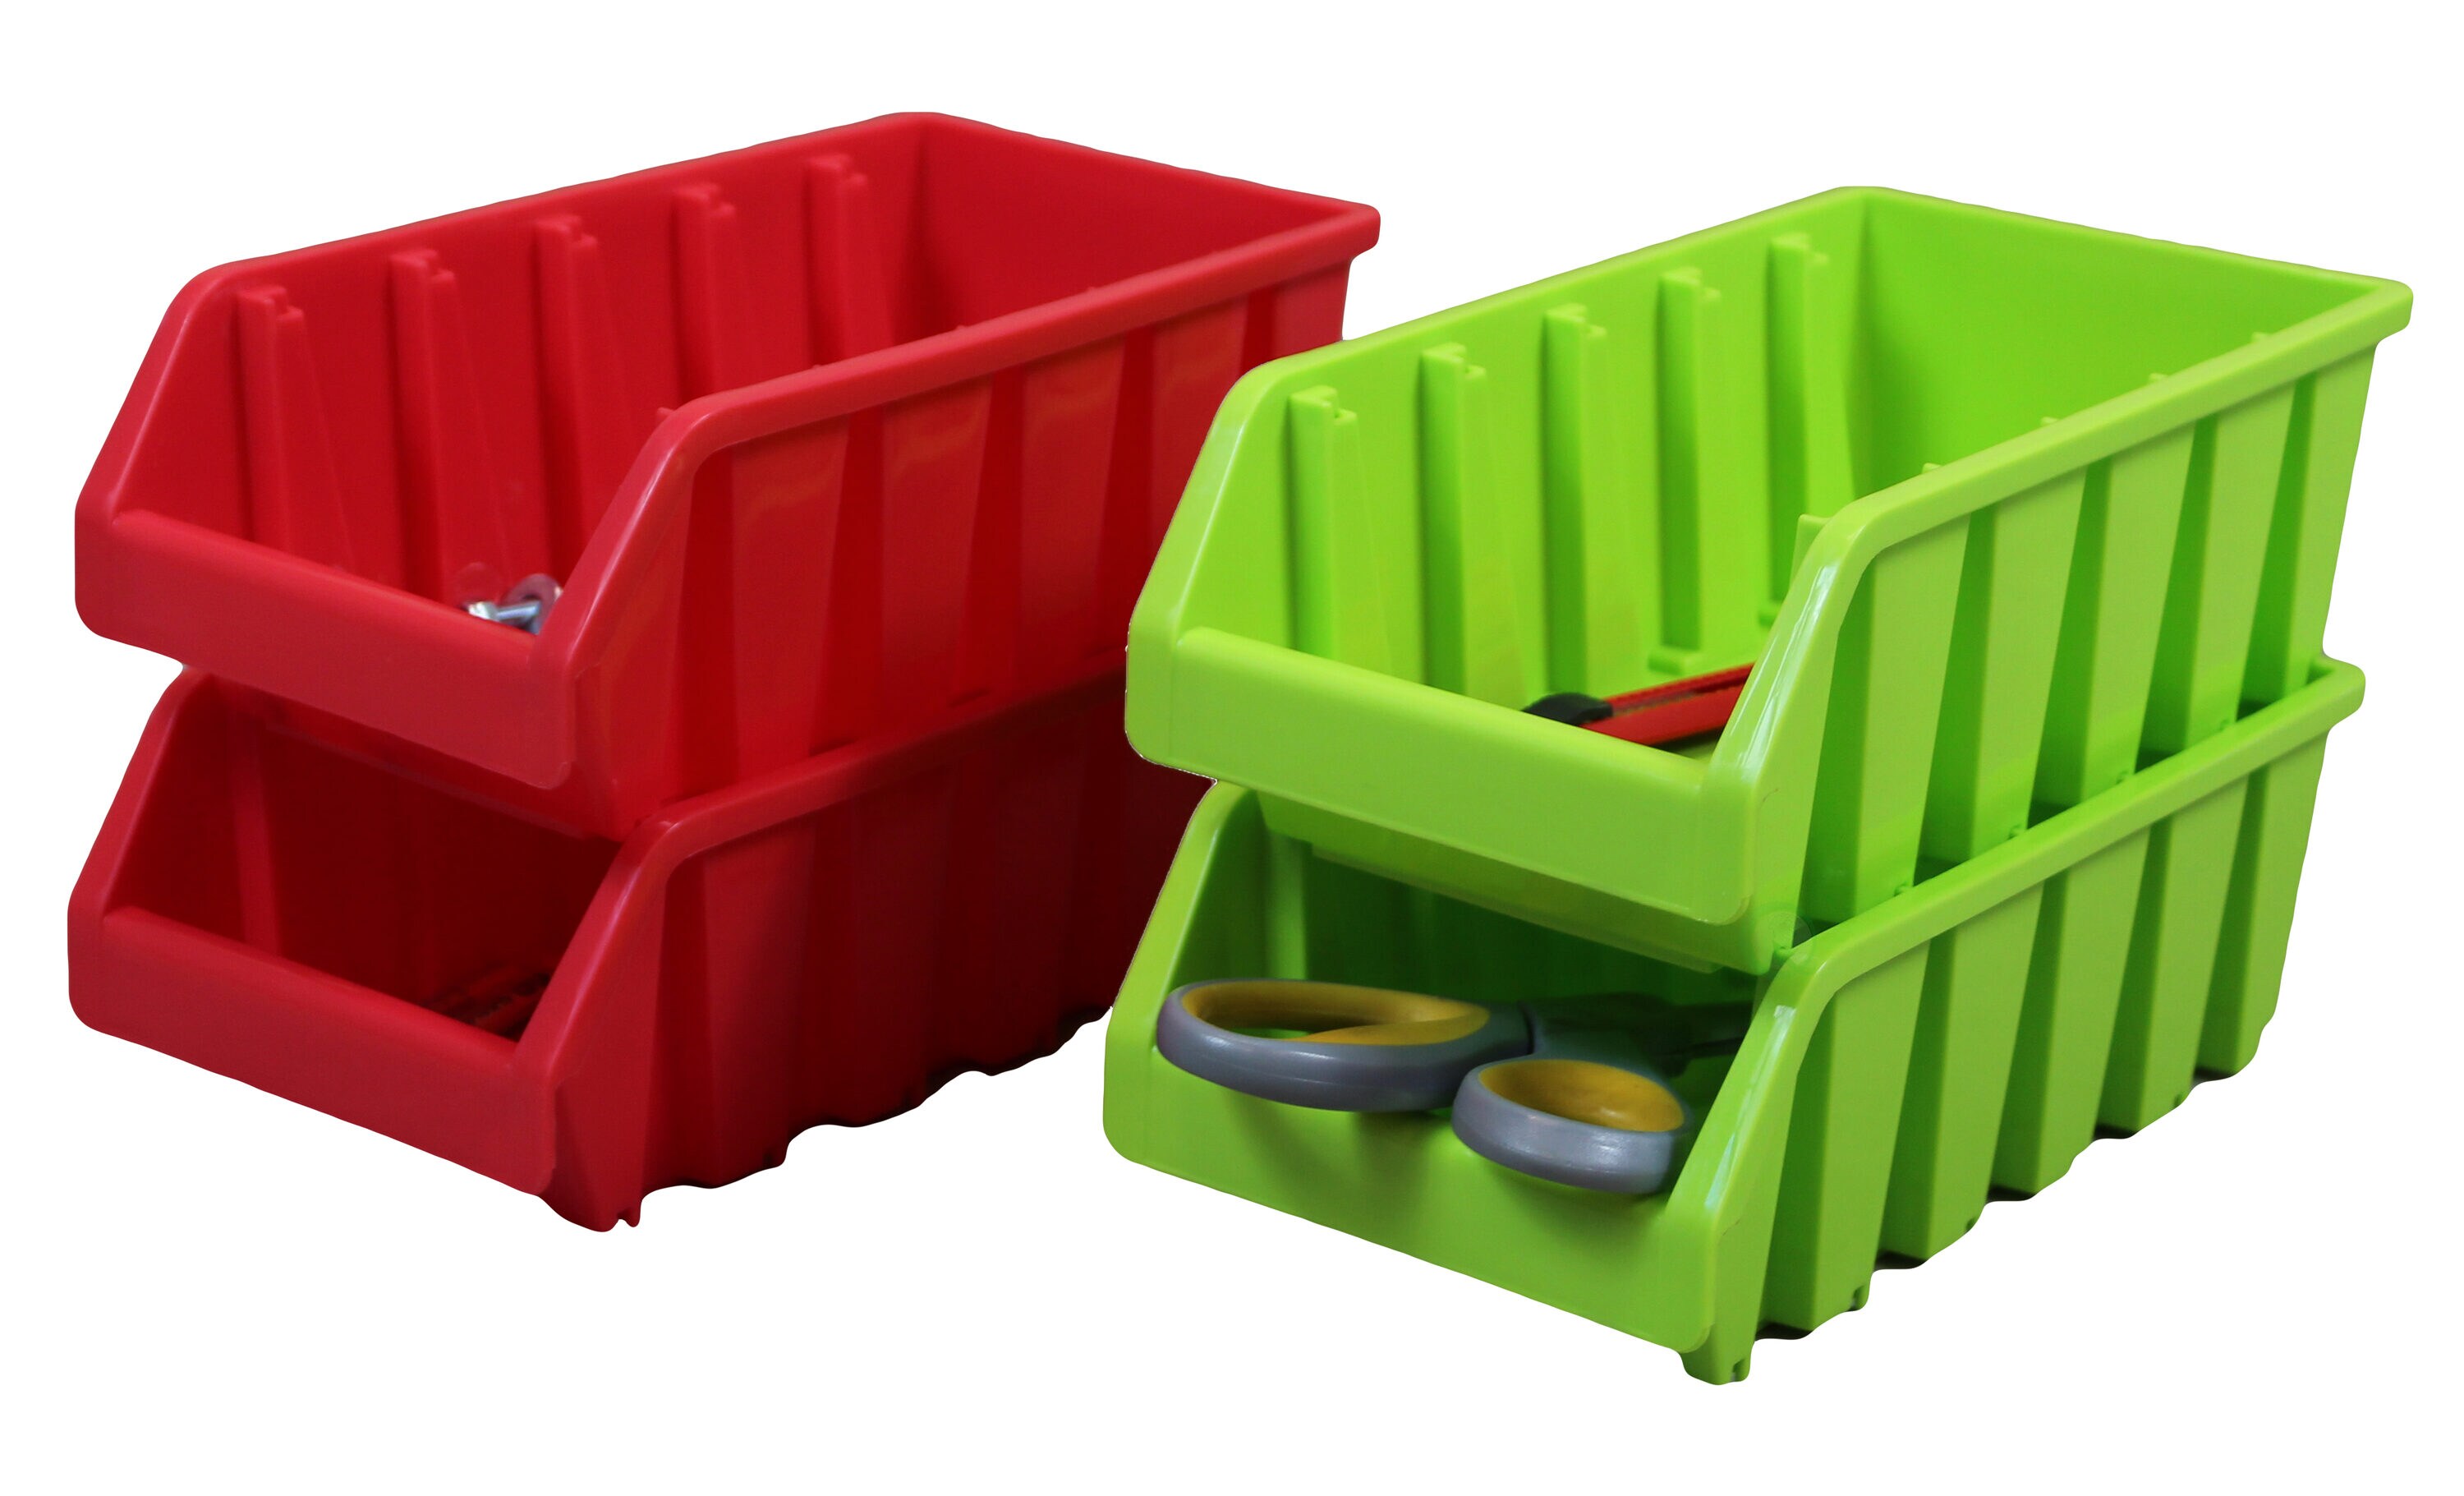 3 Set of 12-Pack Small Stackable Storage Bins - 5 x 4 x 3 Inches